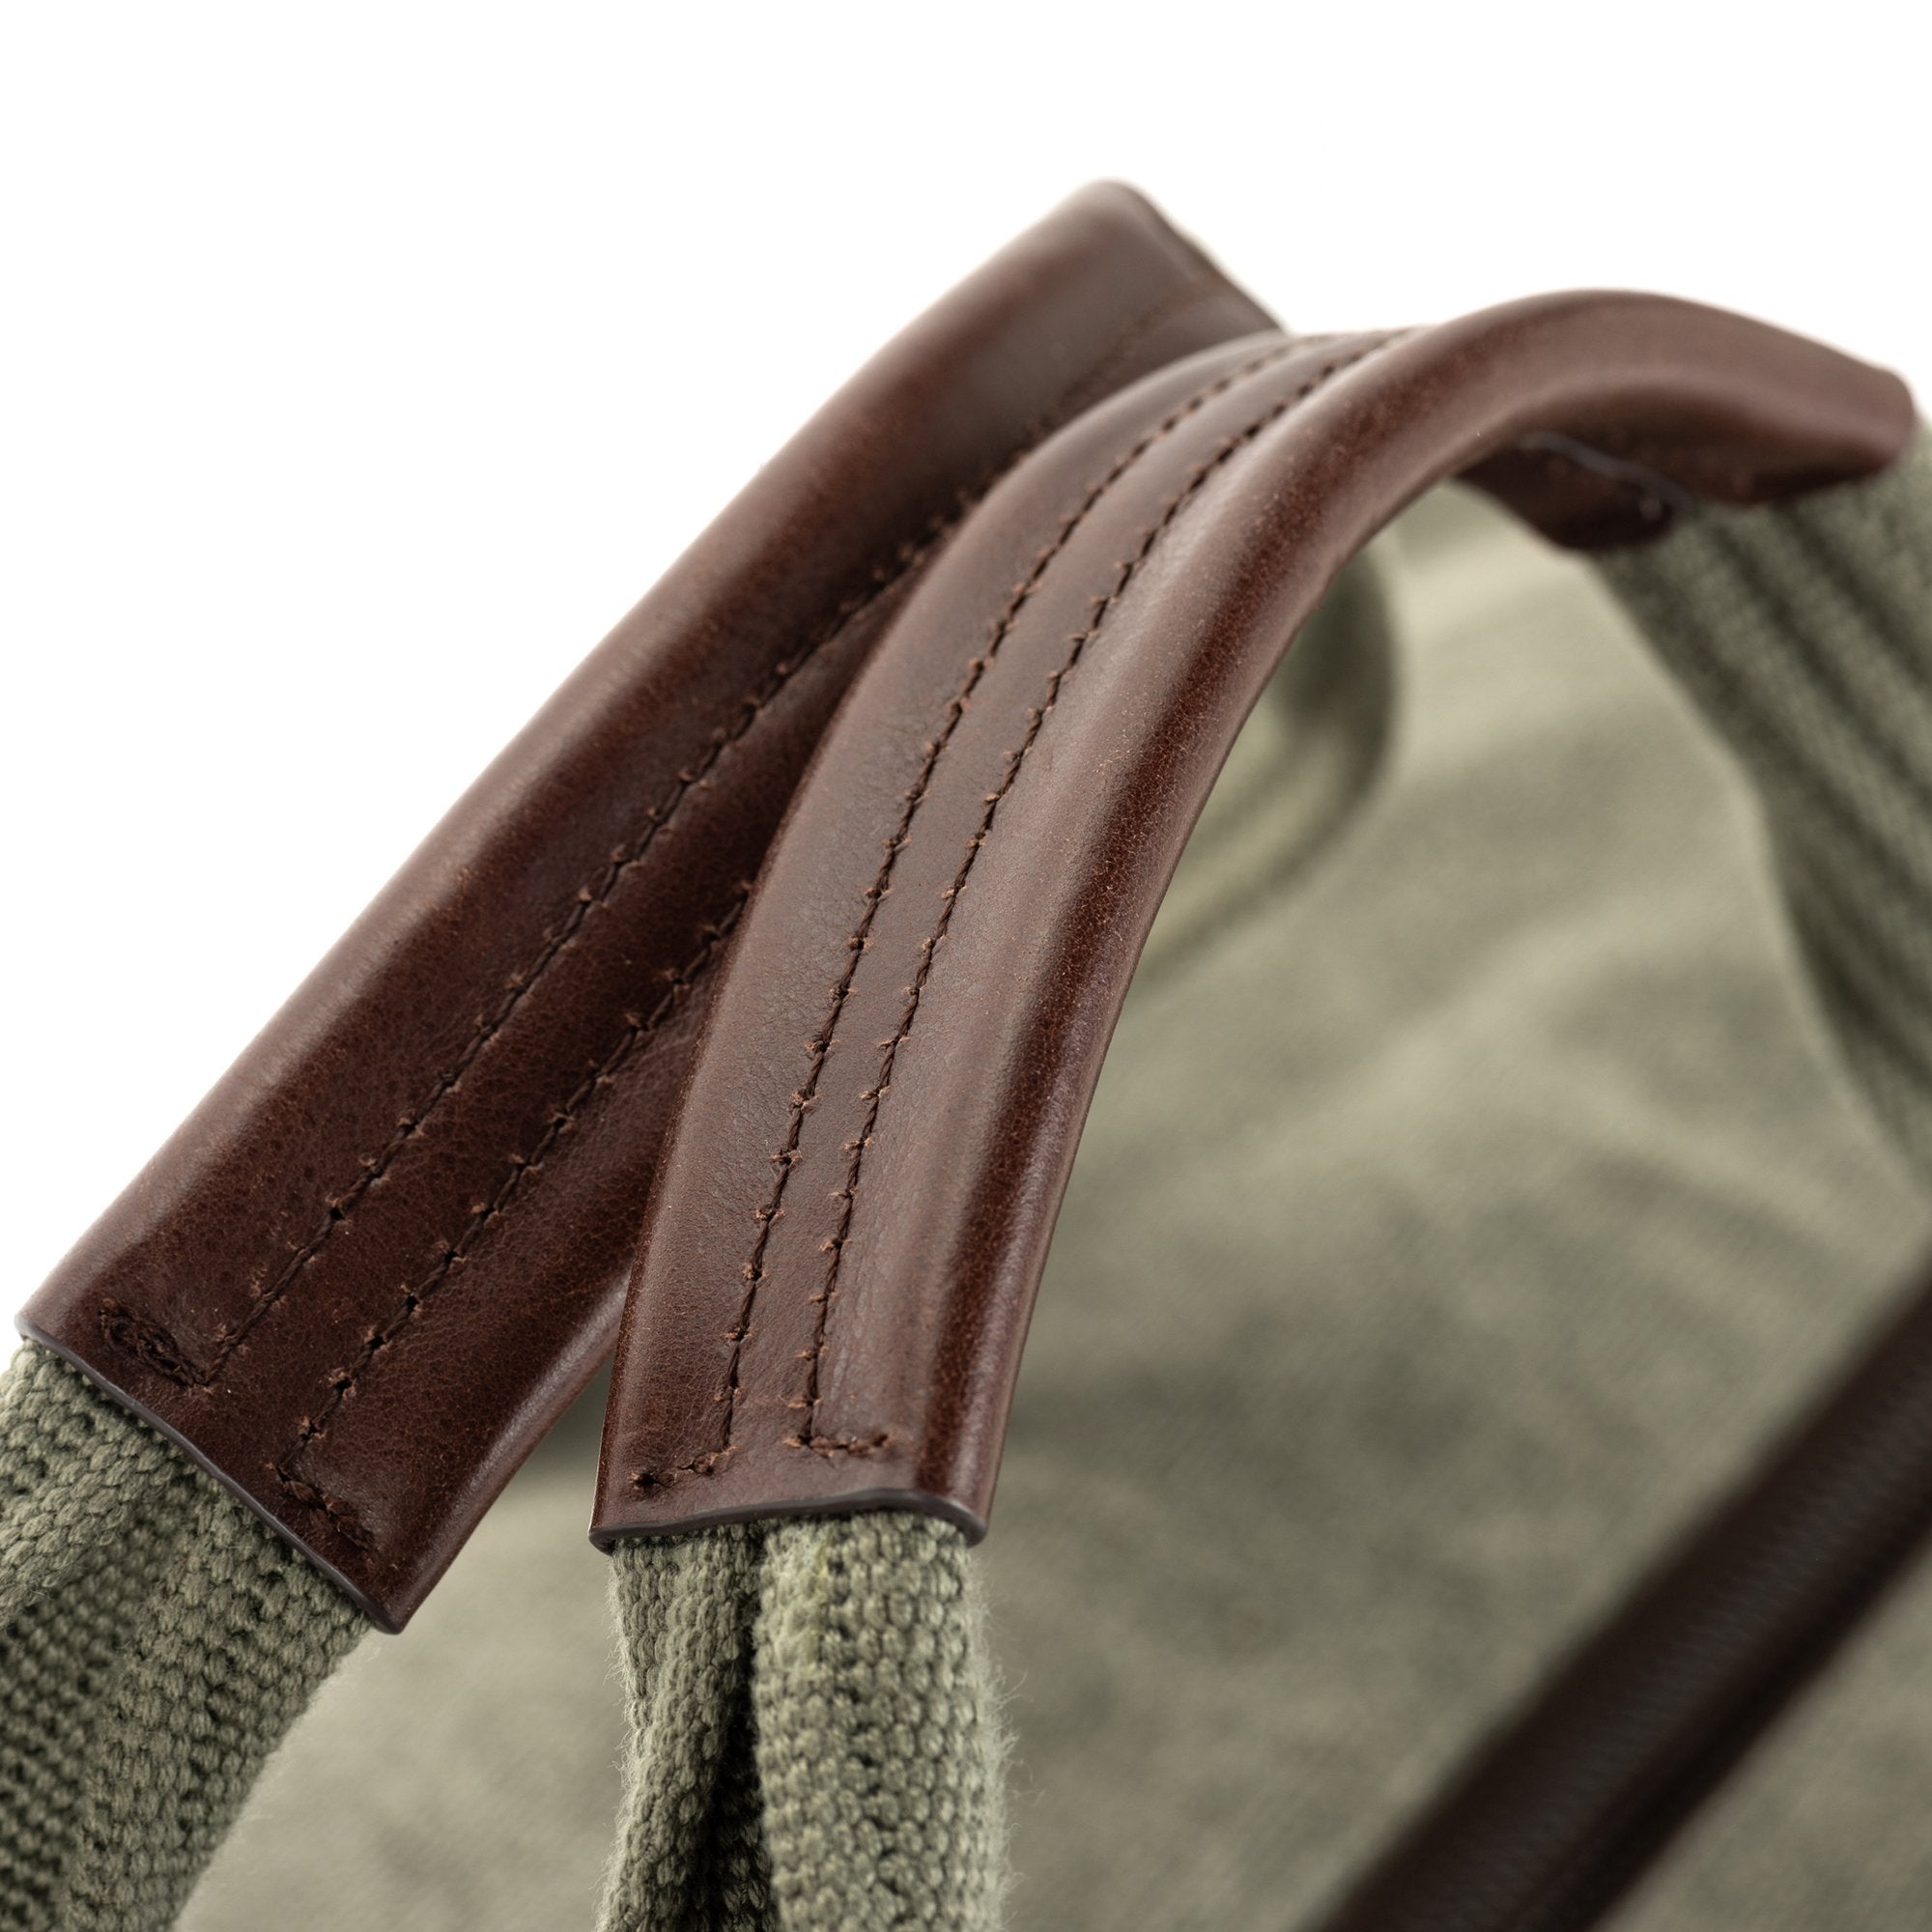 Robust duffel handles are detailed with full-grain Dakota leather